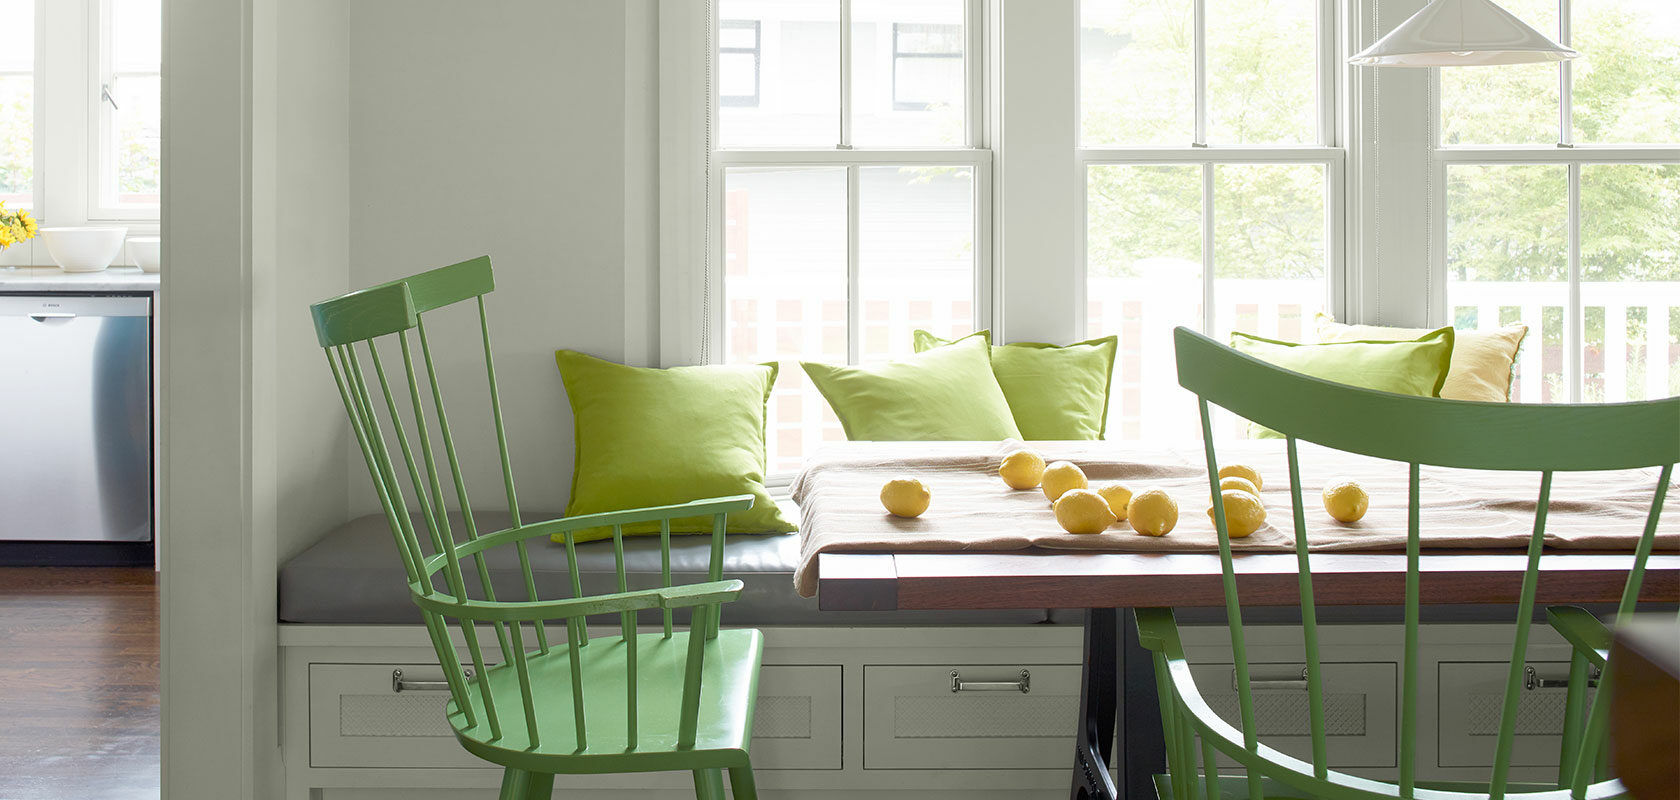 painting furniture image featuring painted green chairs